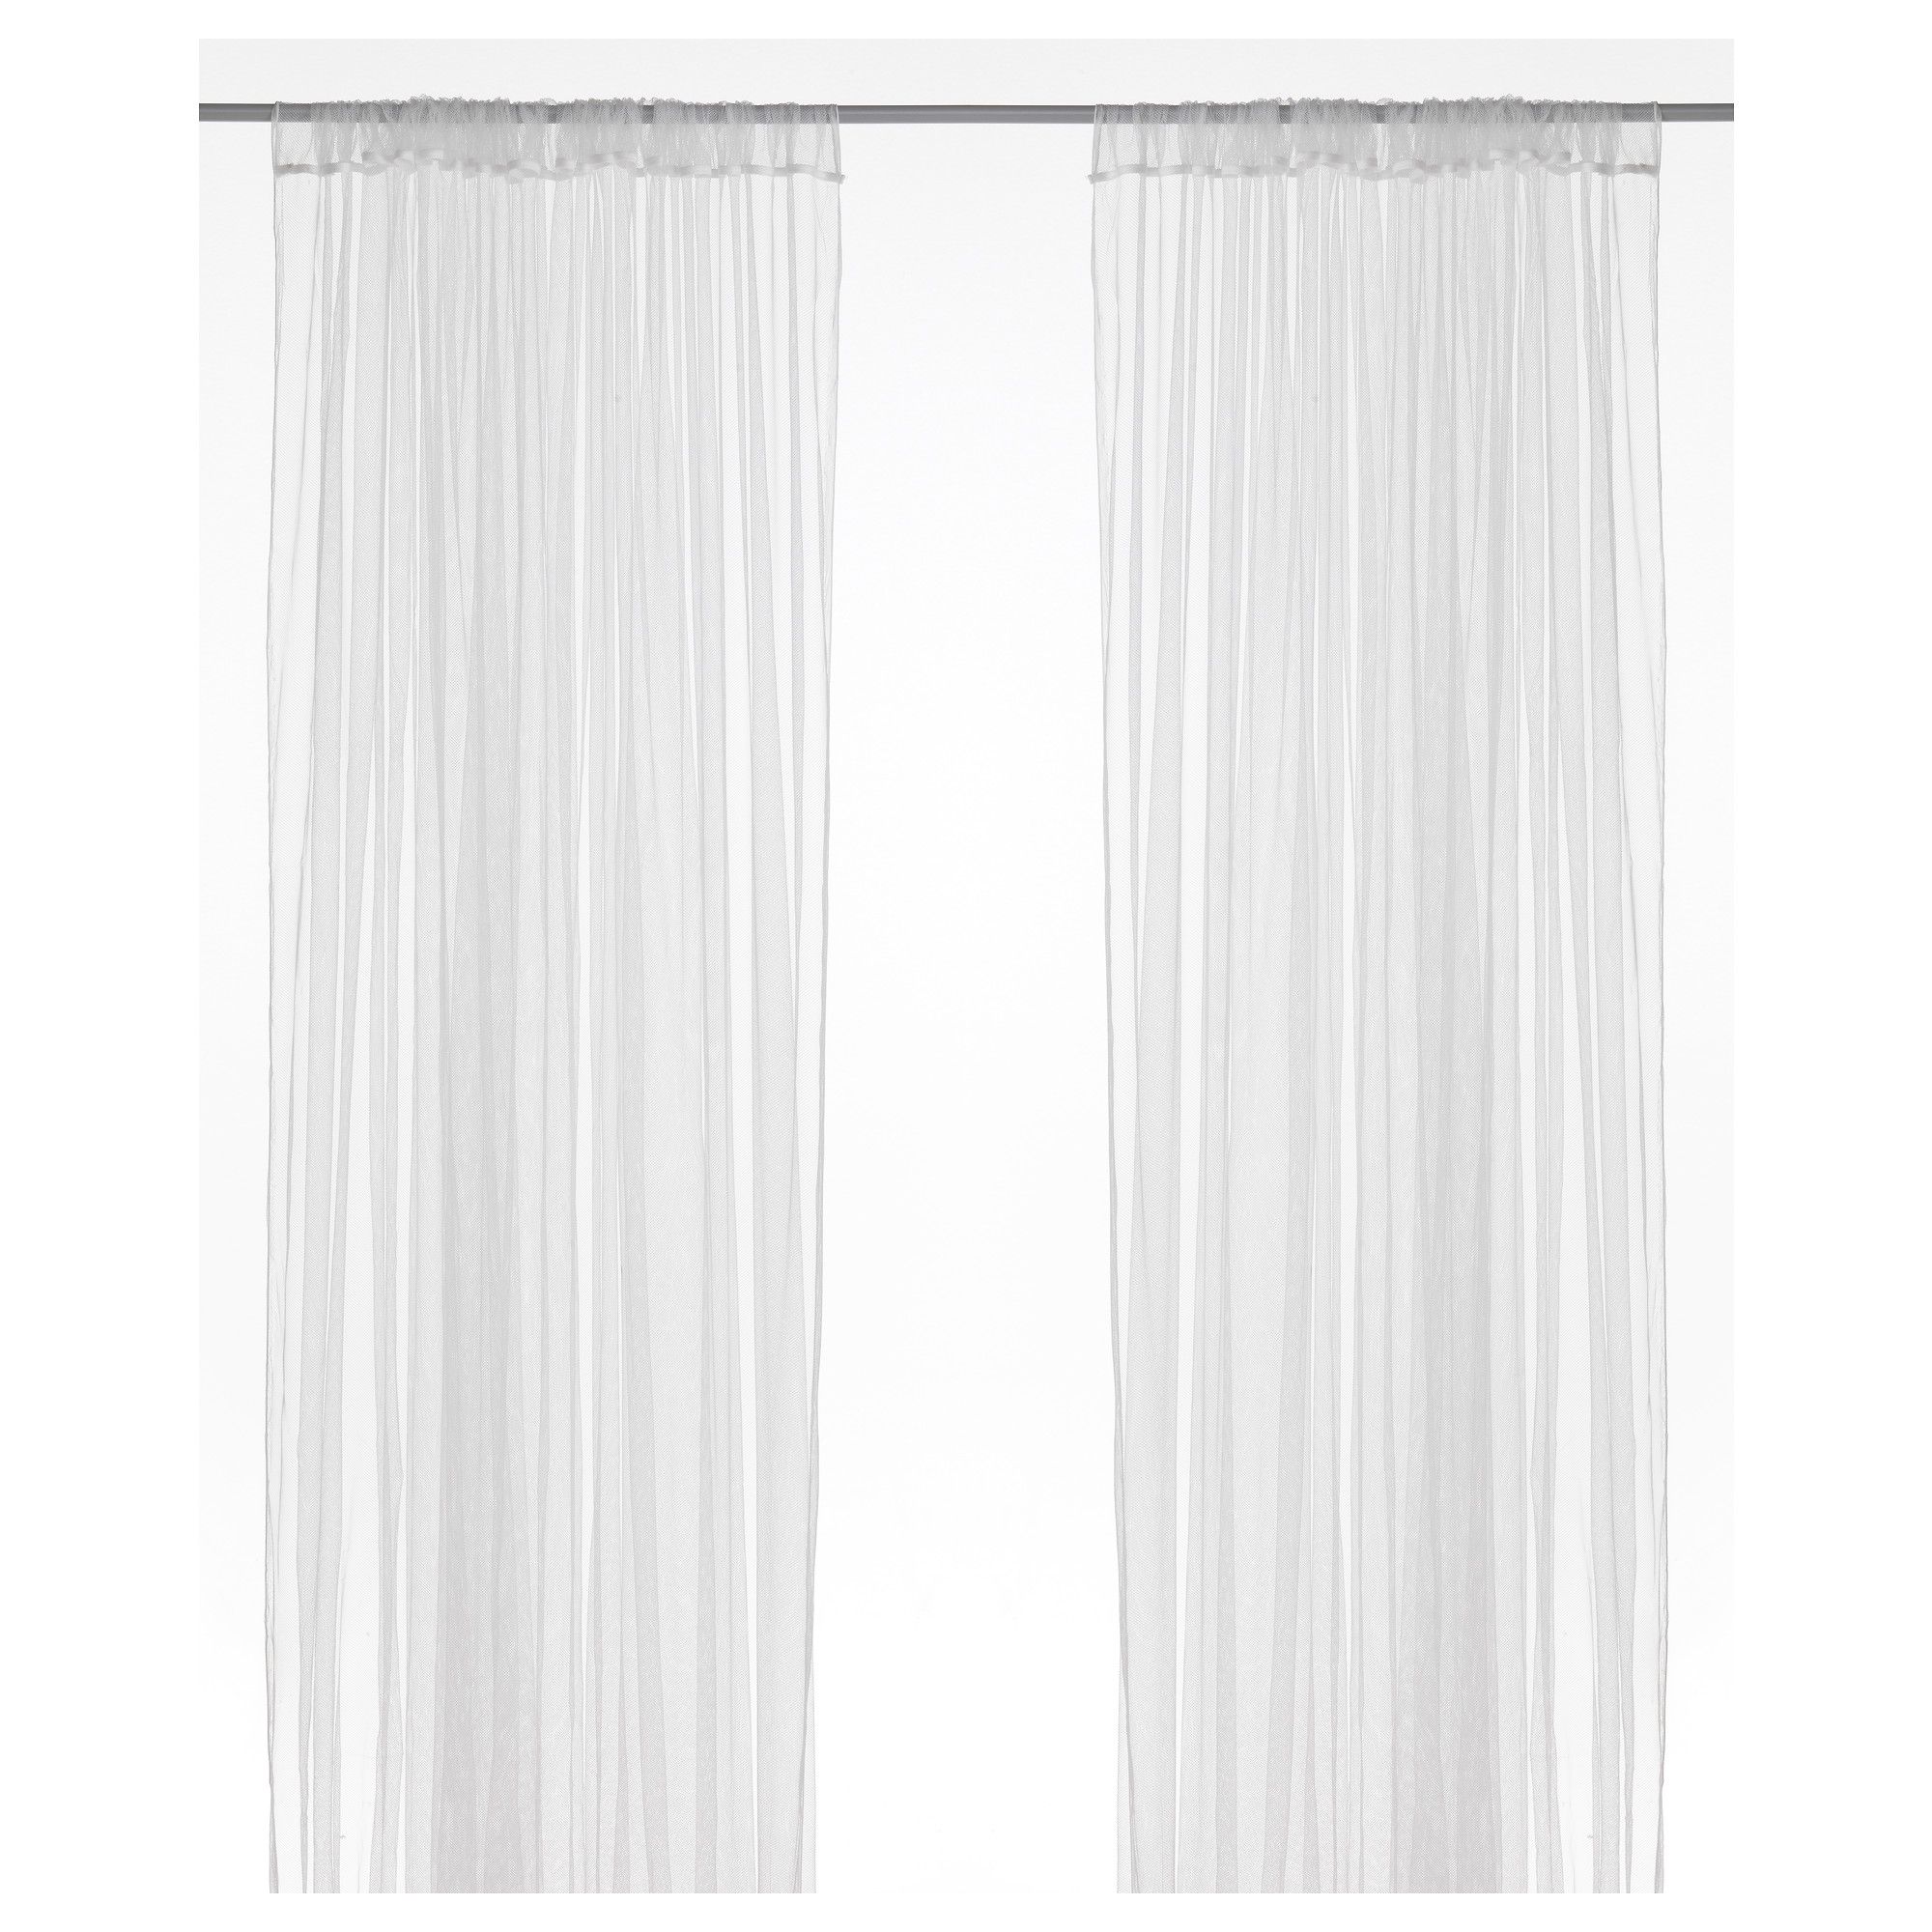 Lill Lace Curtains 1 Pair Ikea Pertaining To Lace Curtains (View 6 of 25)